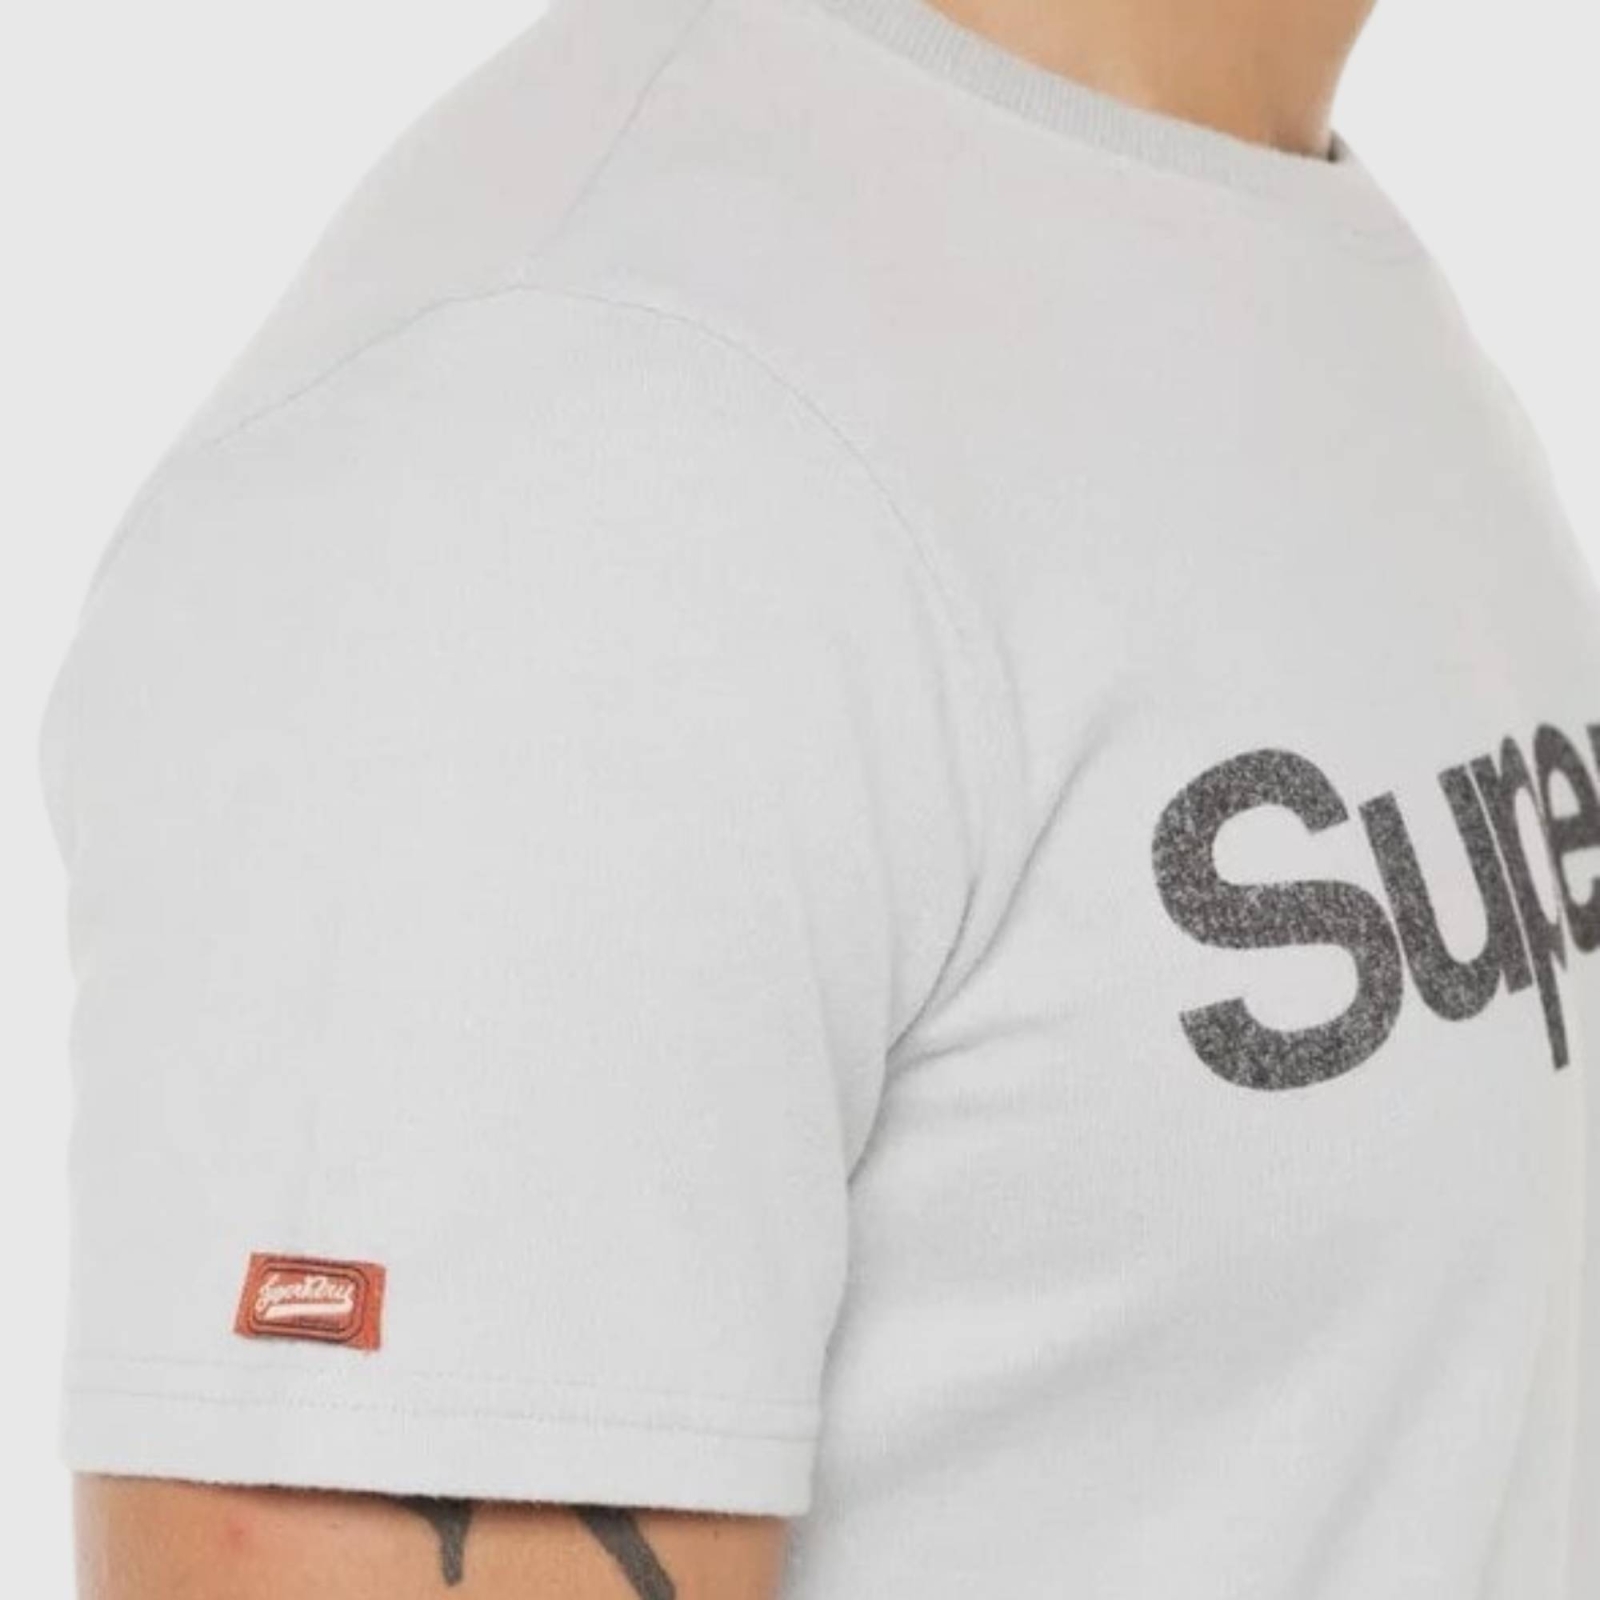 SUPERDRY OVIN VINTAGE CORE LOGO CLASSIC TEE